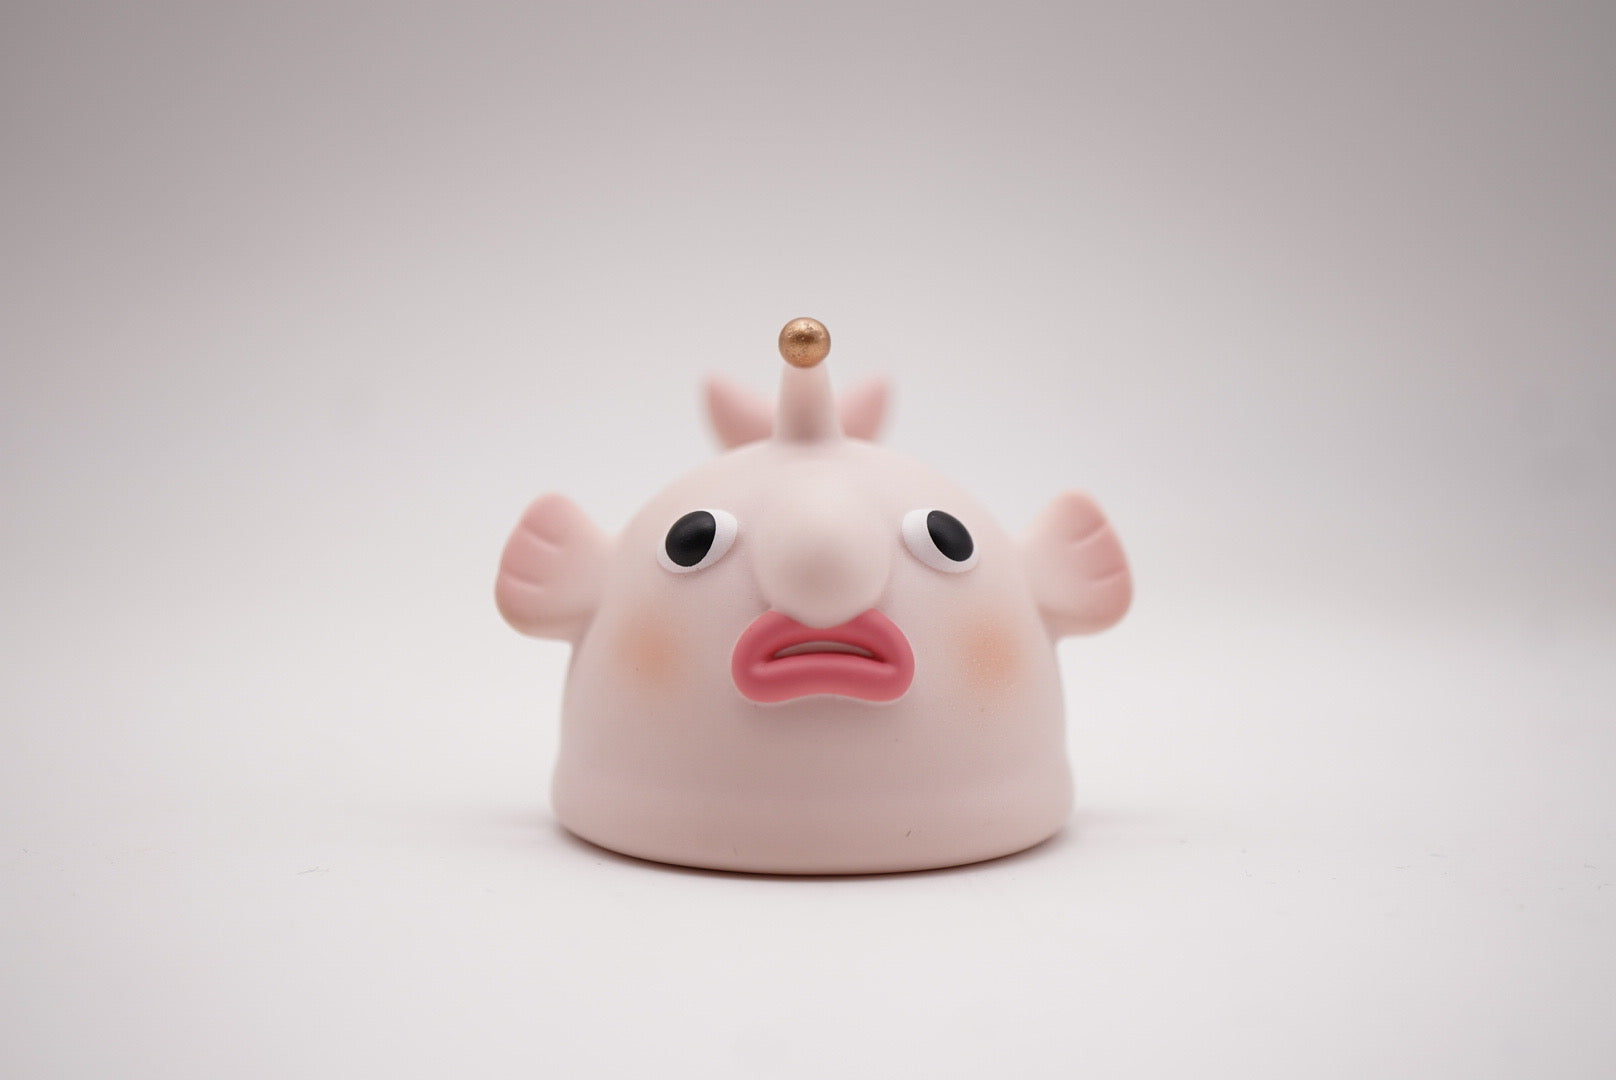 Vinyl toy of POH's Pupu by Vin, an animal figure with a cartoon face and features like a mouth, eyeball, and foot.